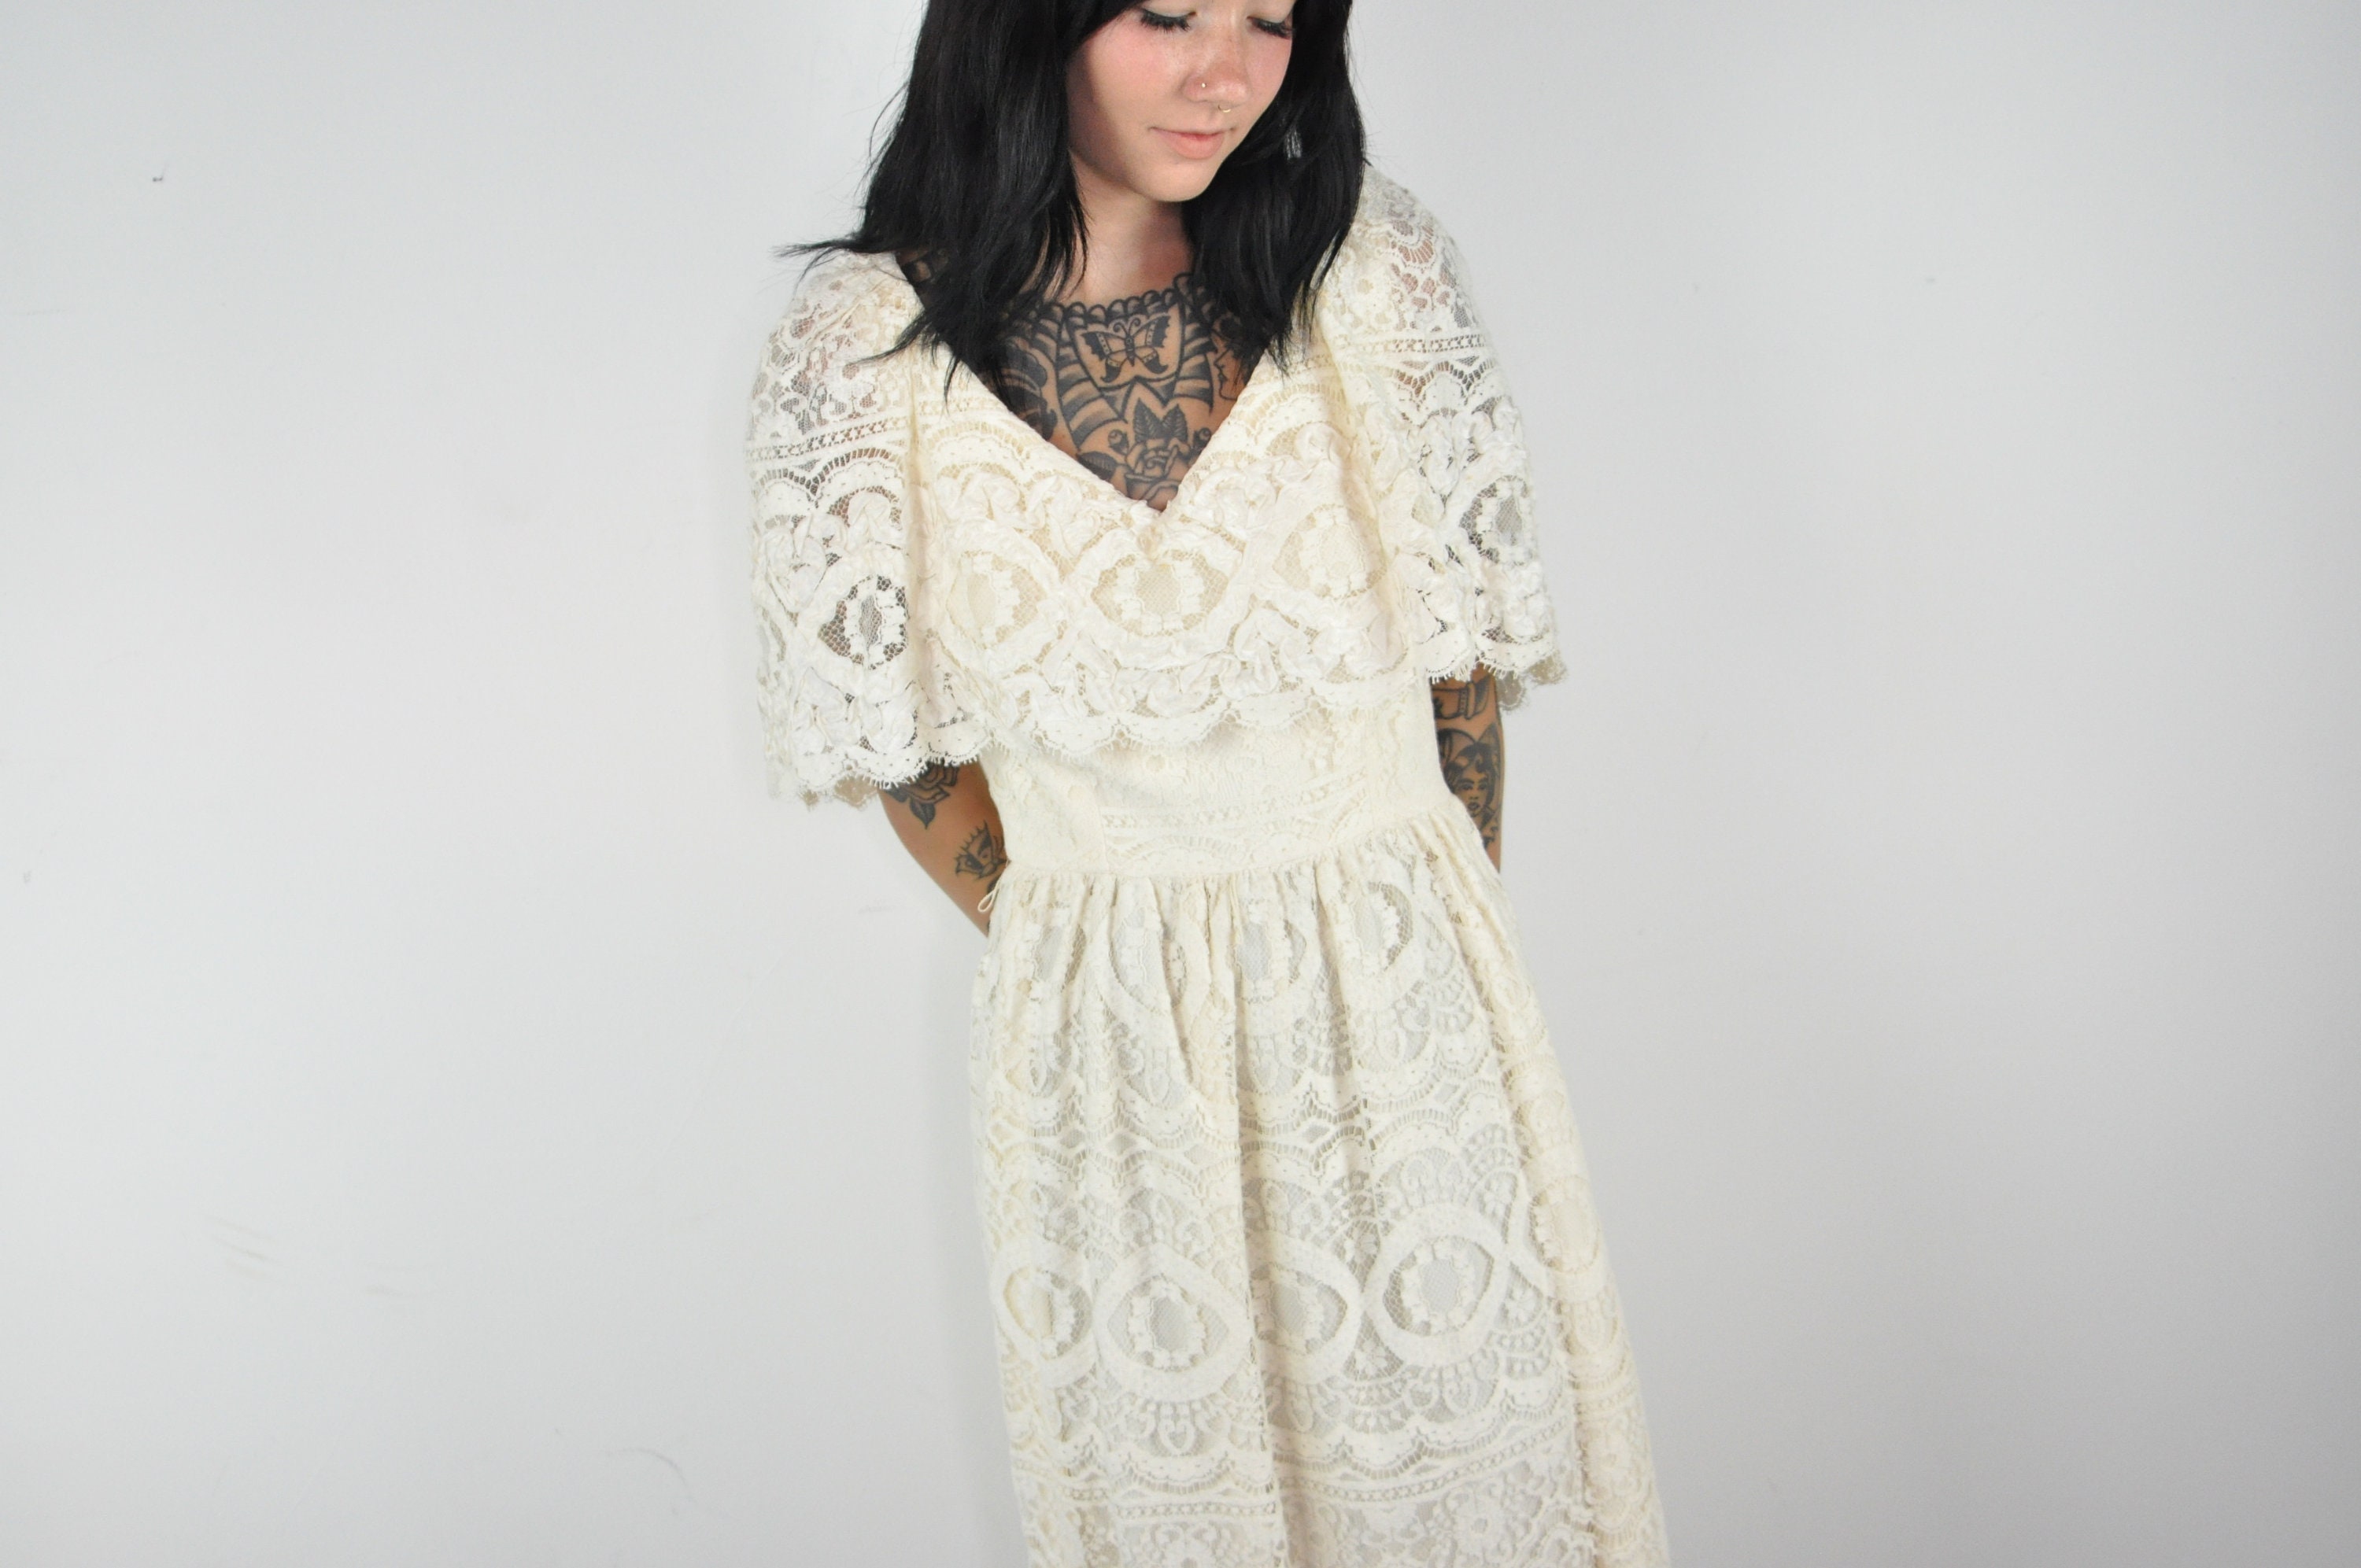 Black lace on the sides of a cream color dress | Beige lace dresses, Lace  dress, Beautiful dresses